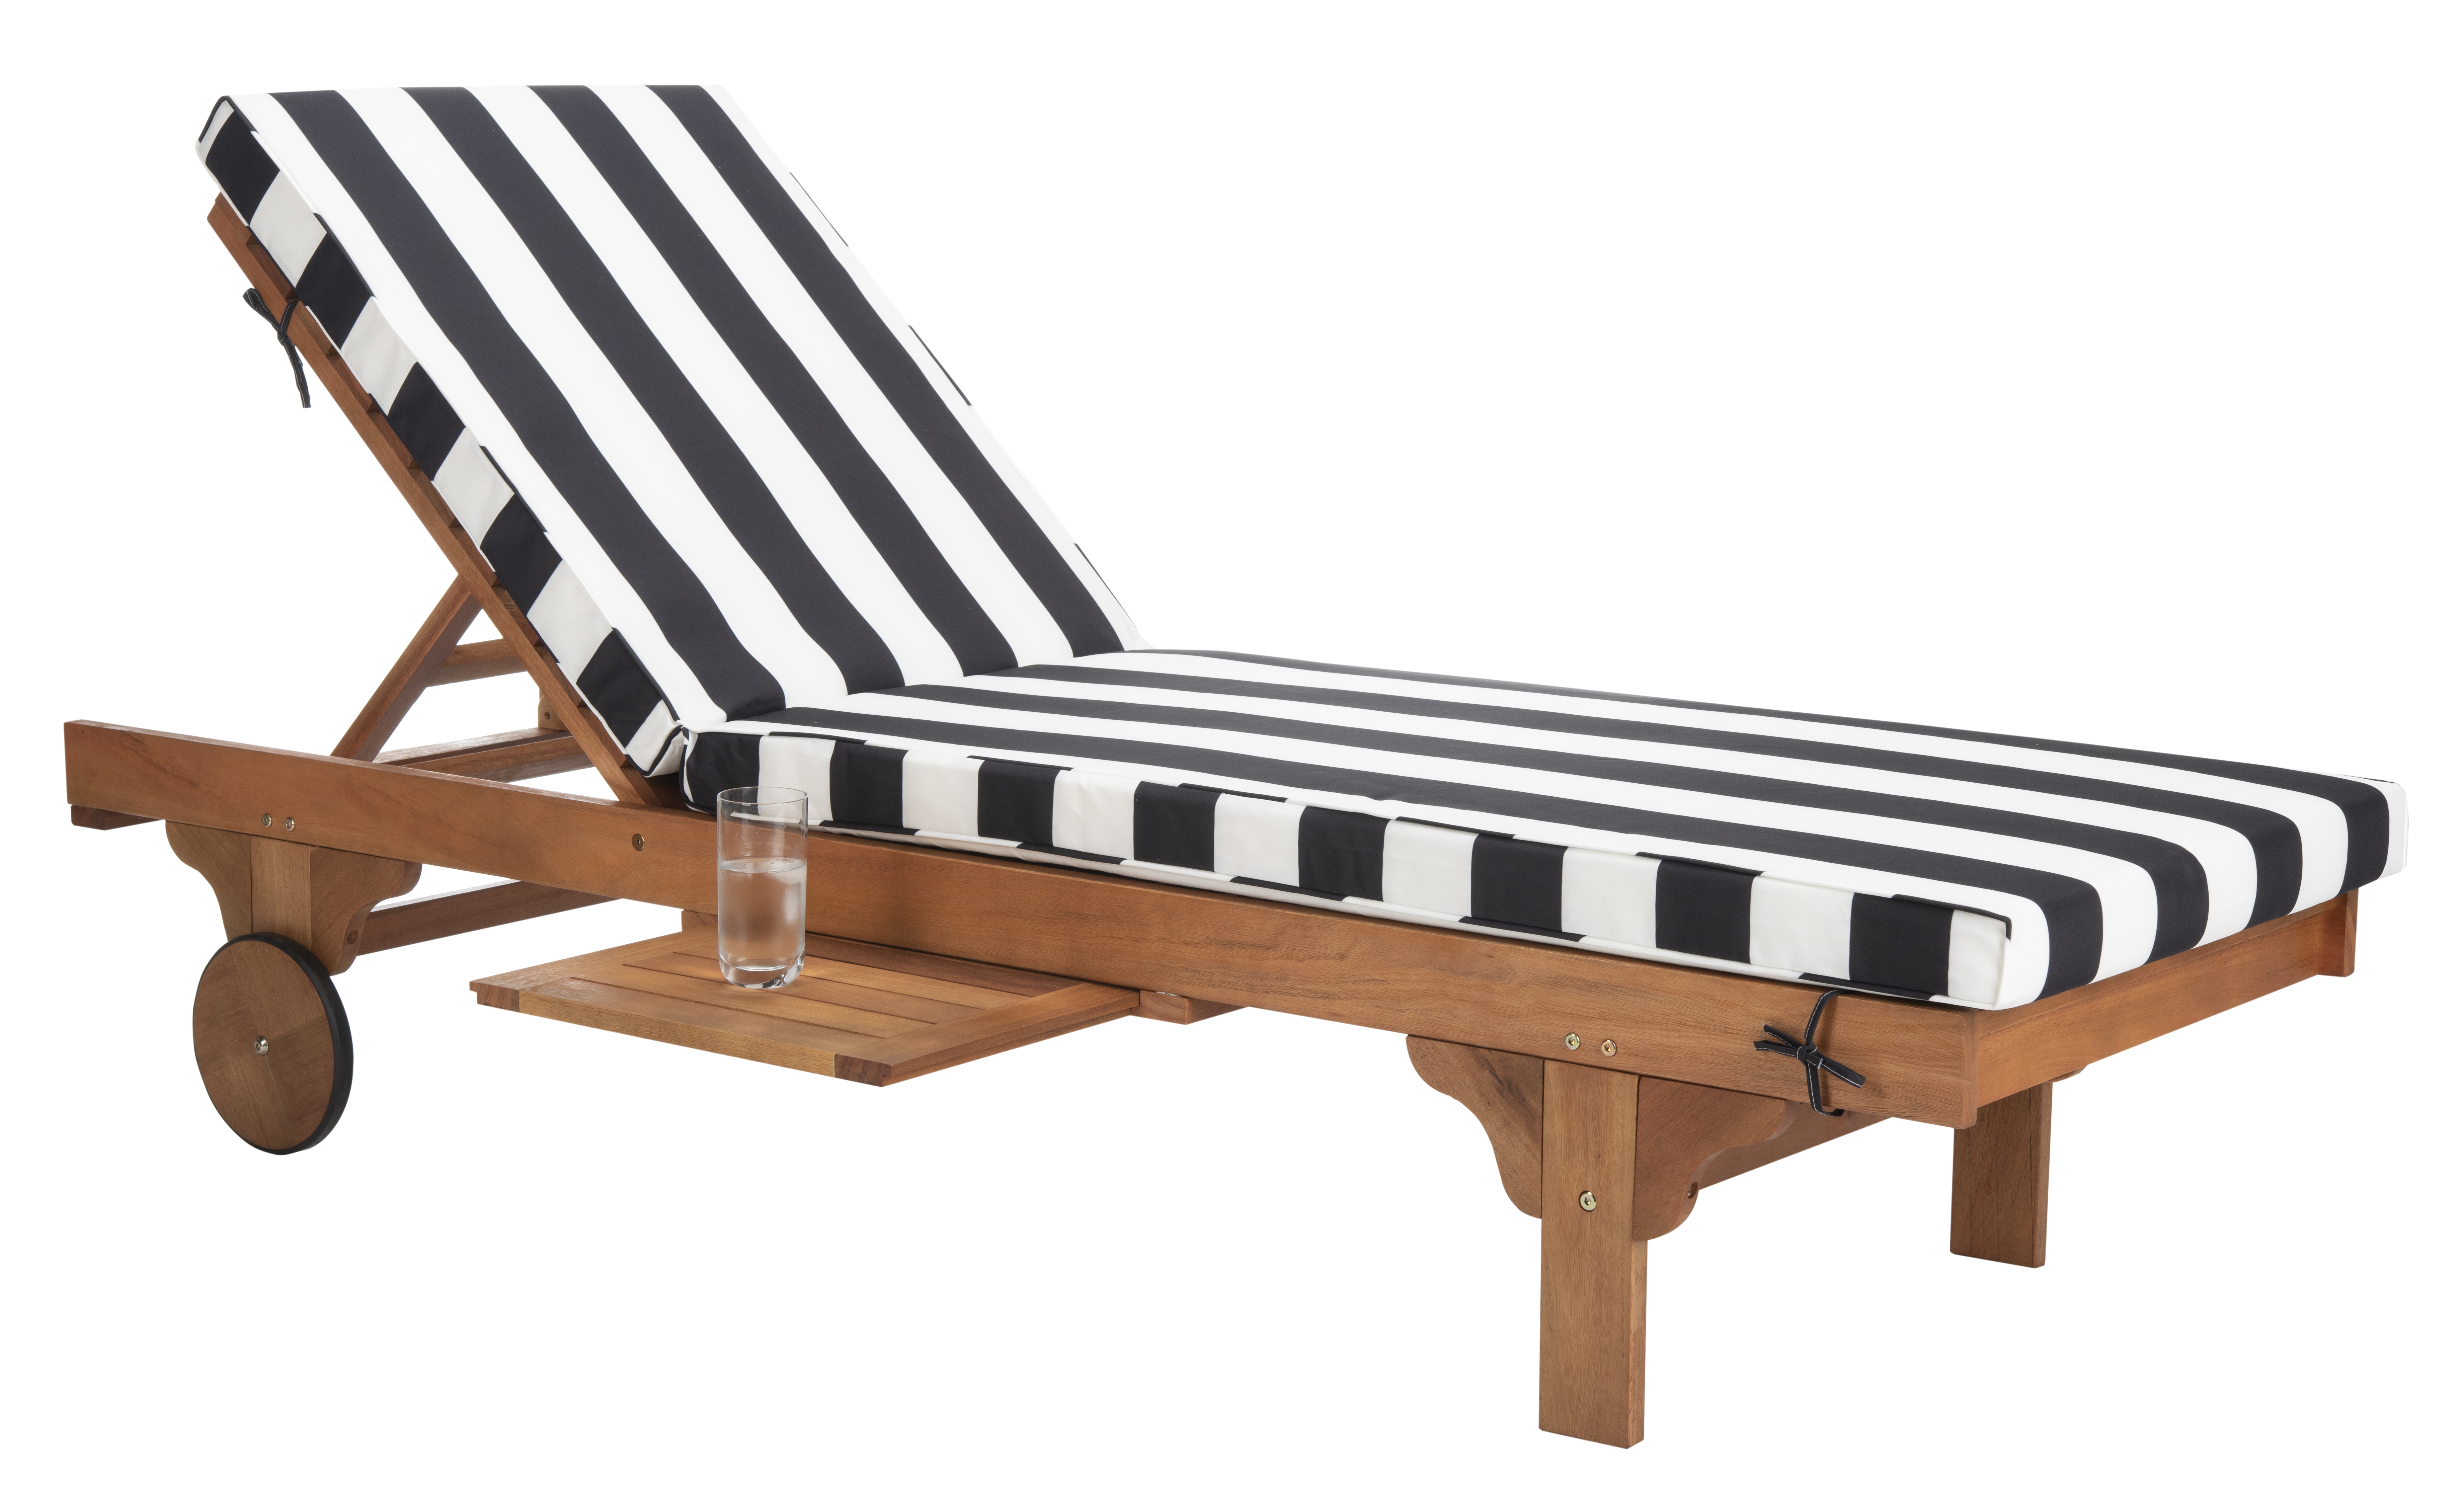 Newport Chaise Lounge Chair With Side Table, Black & White - Image 1